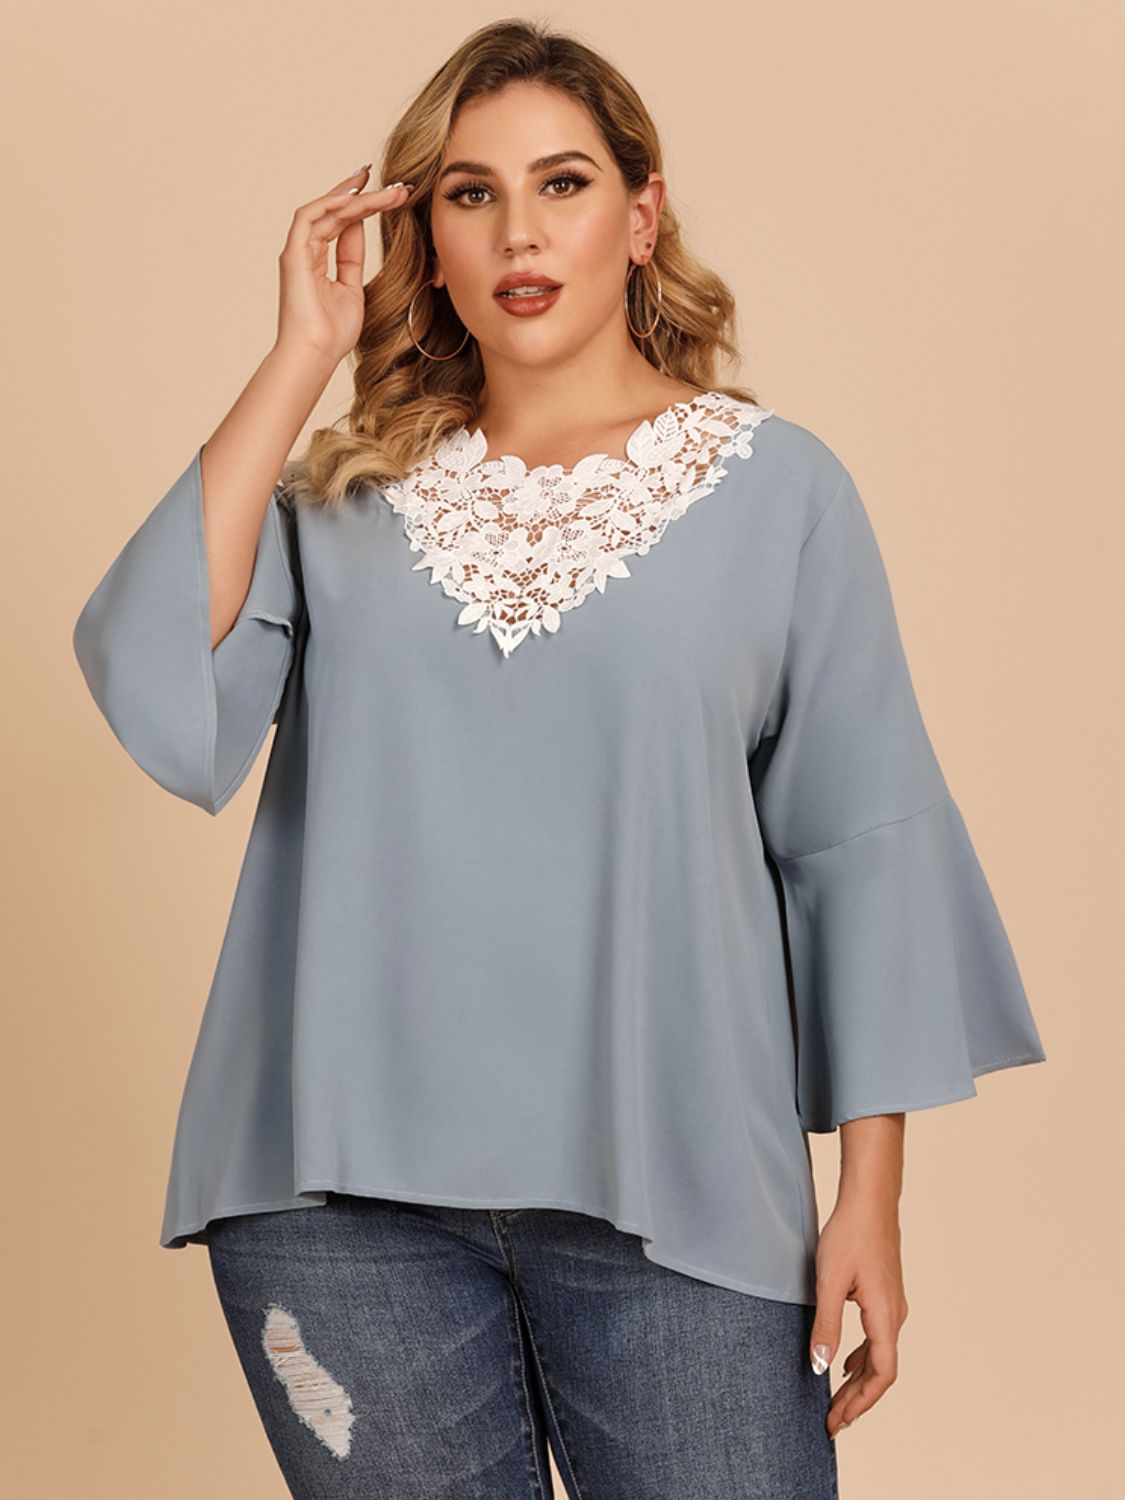 Contrast Spliced Lace Three-Quarter Sleeve Blouse